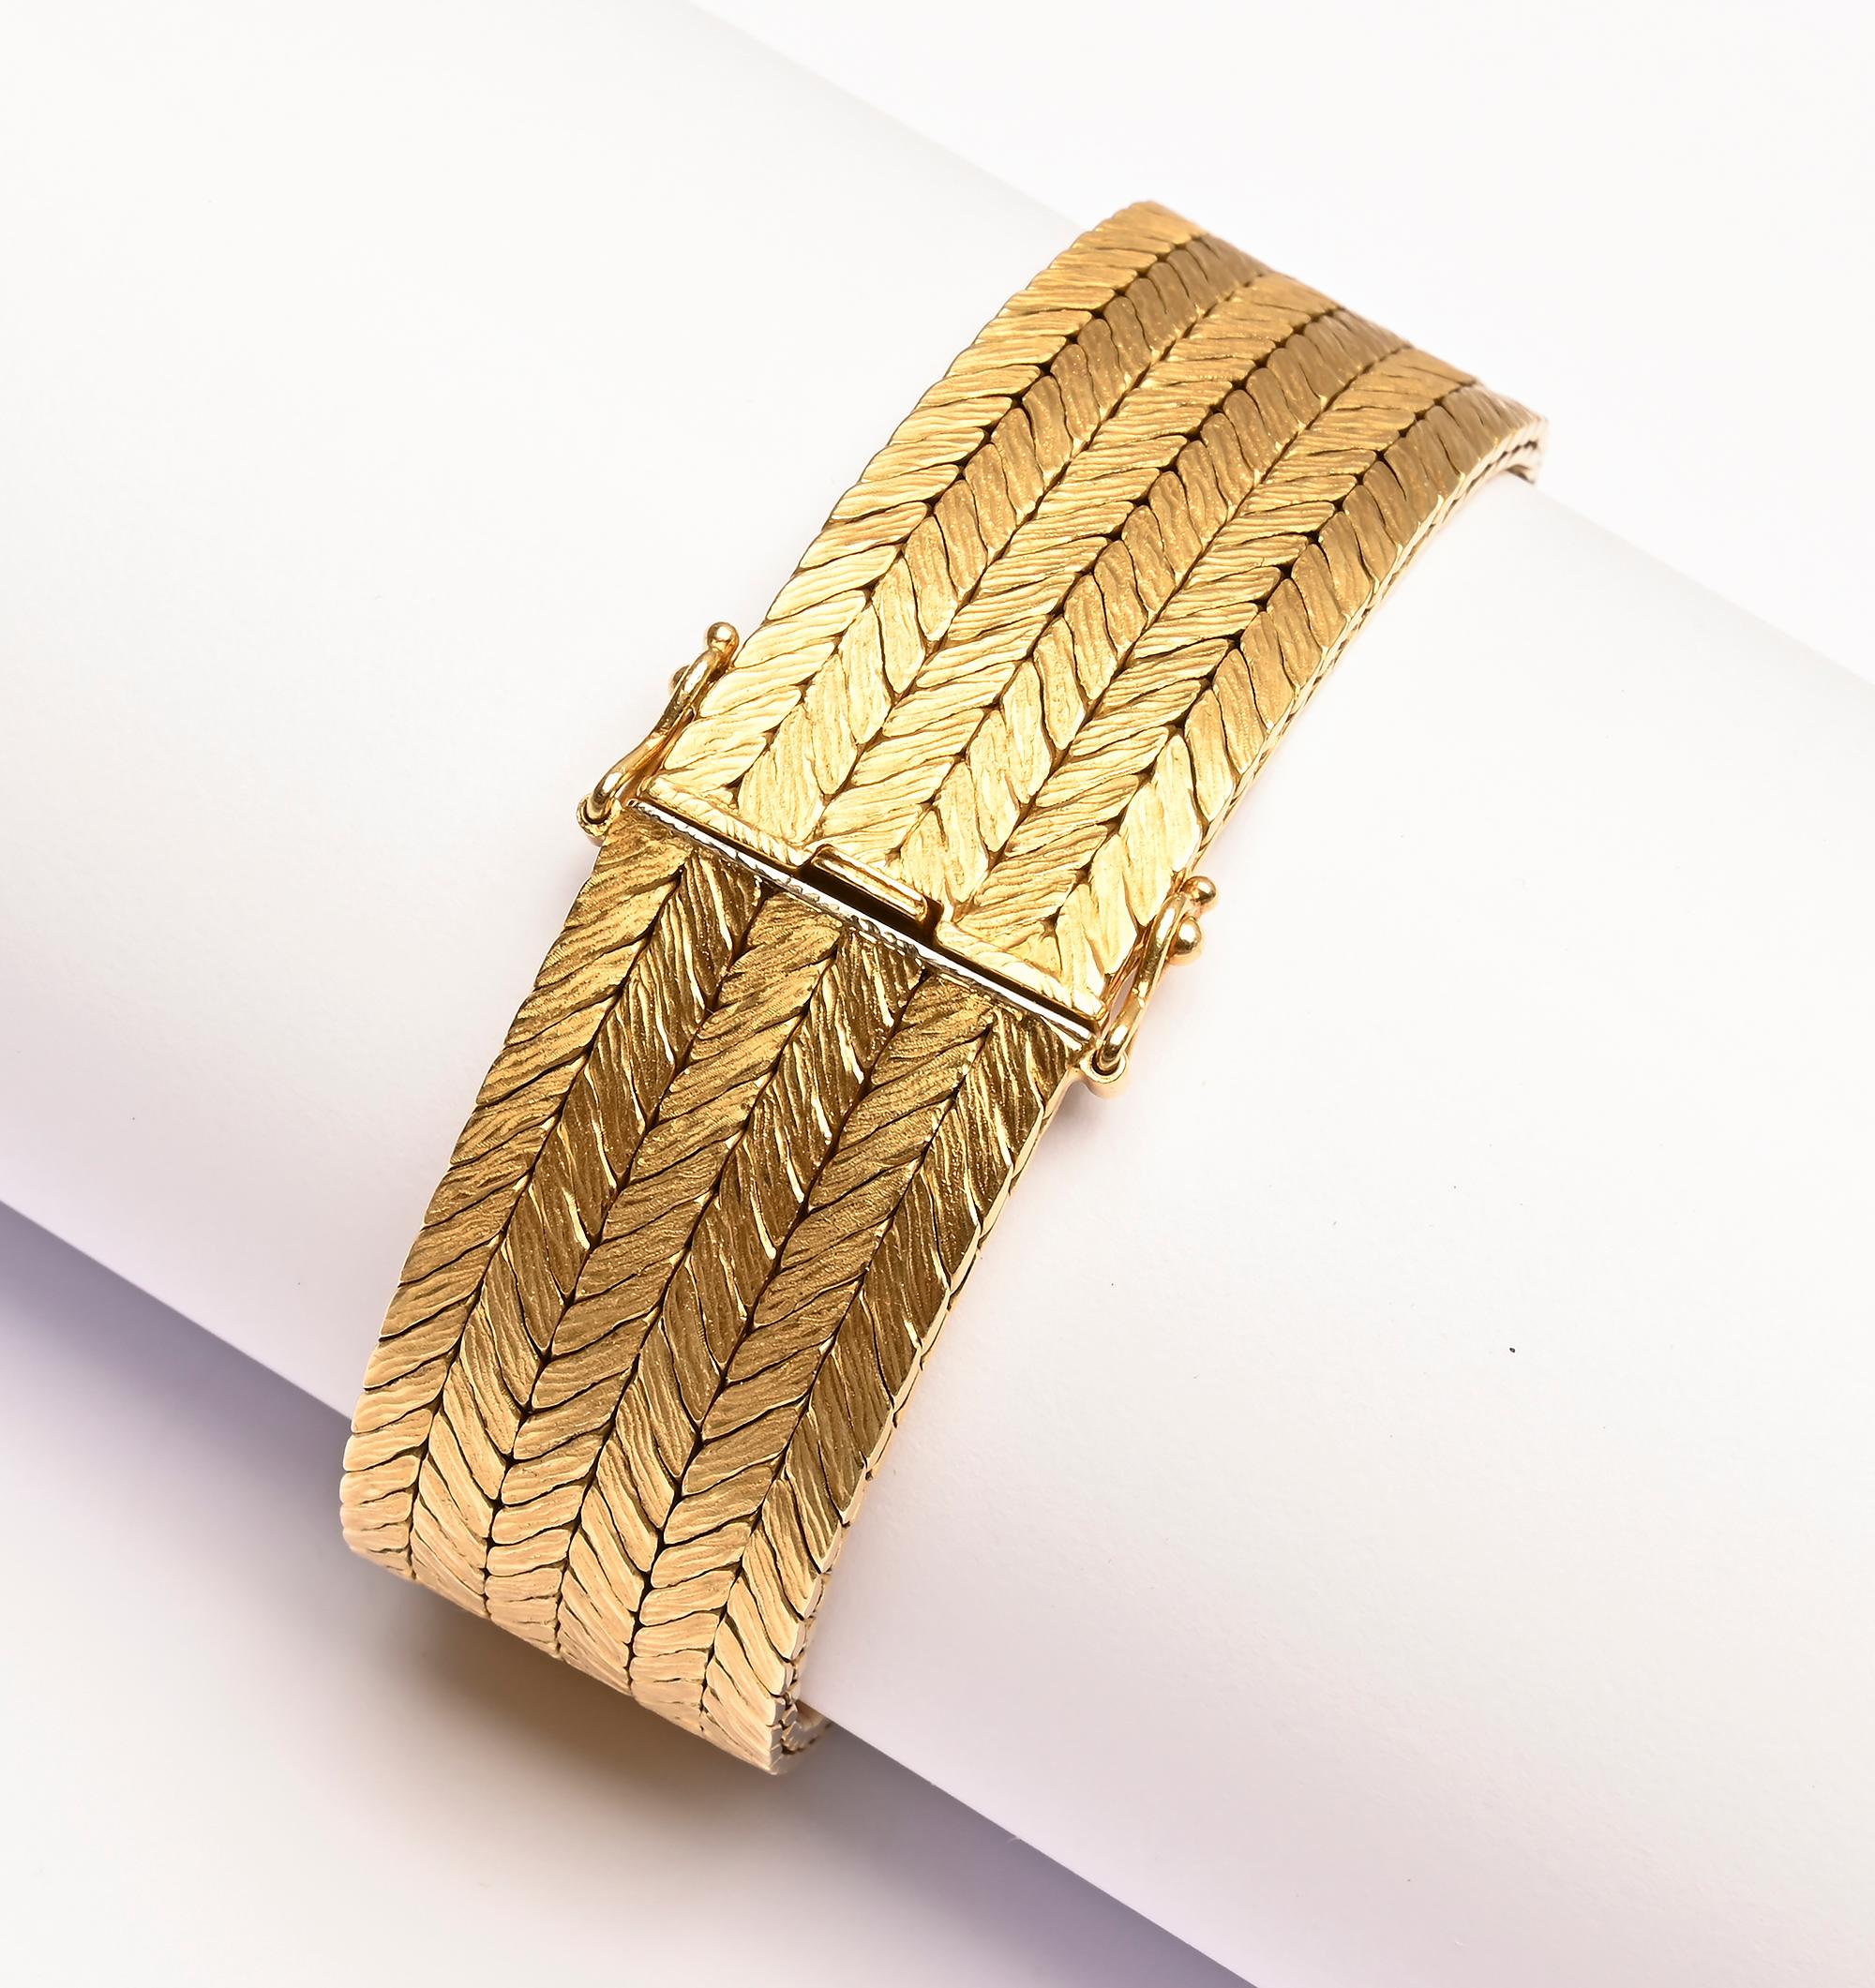 Exquisitely made, finely woven 18 karat gold bracelet by Tiffany. It was made in West Germany which existed as such from 1945 - 1990. The bracelet is tightly woven in six rows. It has a lightly brushed finish. The push clasp has two safety catches.